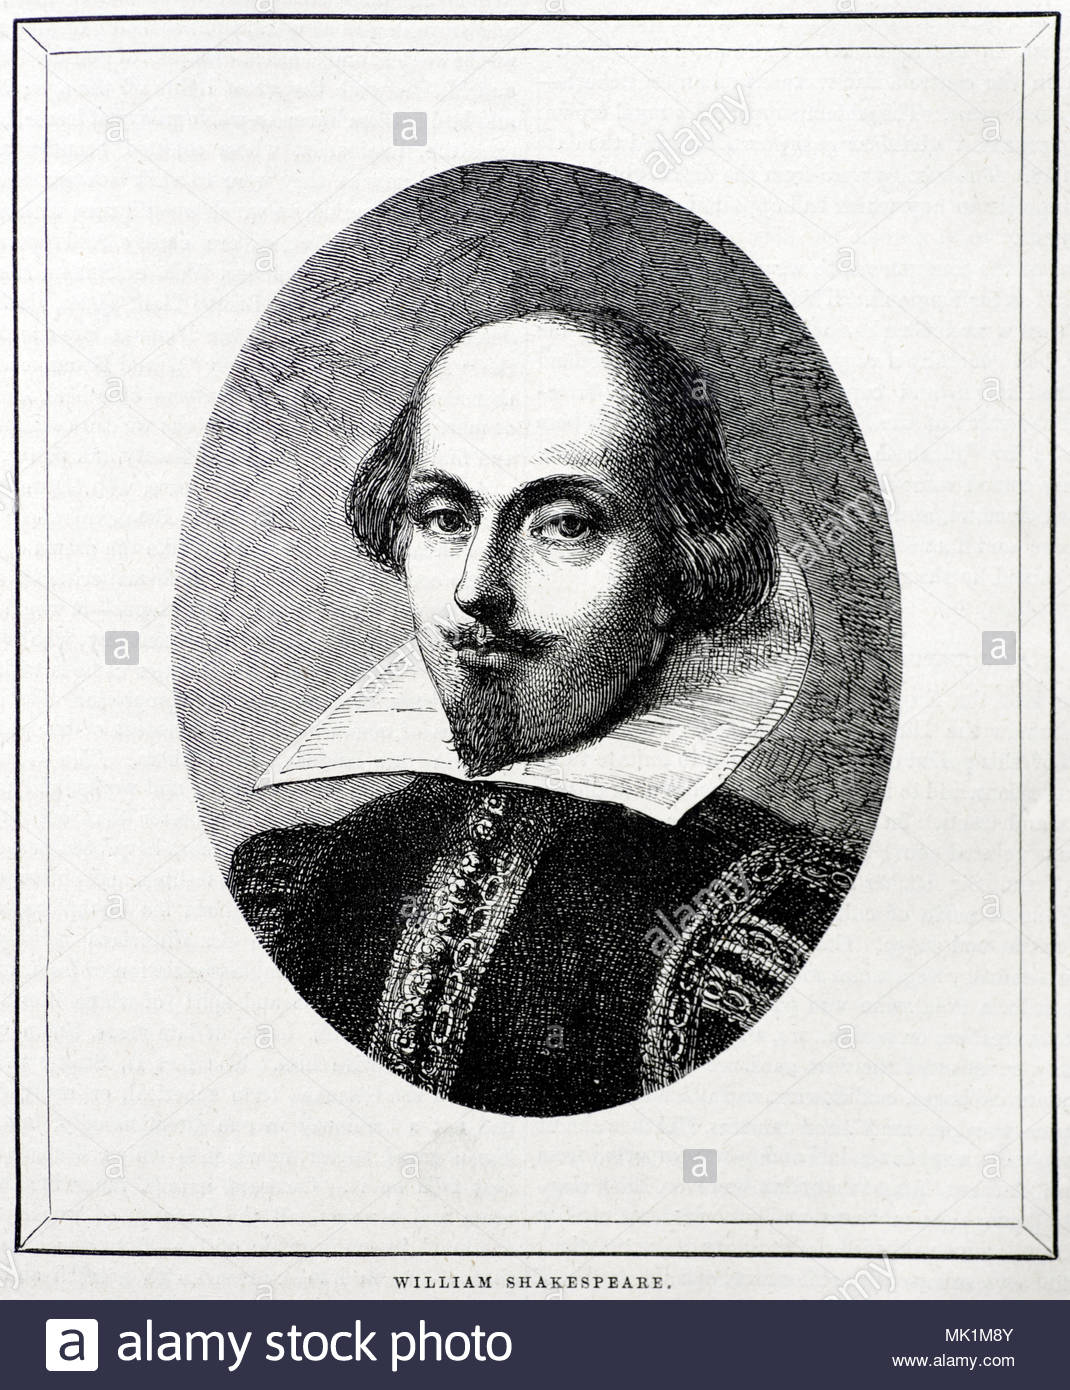 William Shakespeare portrait, 26th April 1564 – 23th April 1616 was an English poet, and playwright, widely regarded as both the greatest writer in the English language, and the world's pre-eminent dramatist, antique illustration from circa 1880 Stock Photo